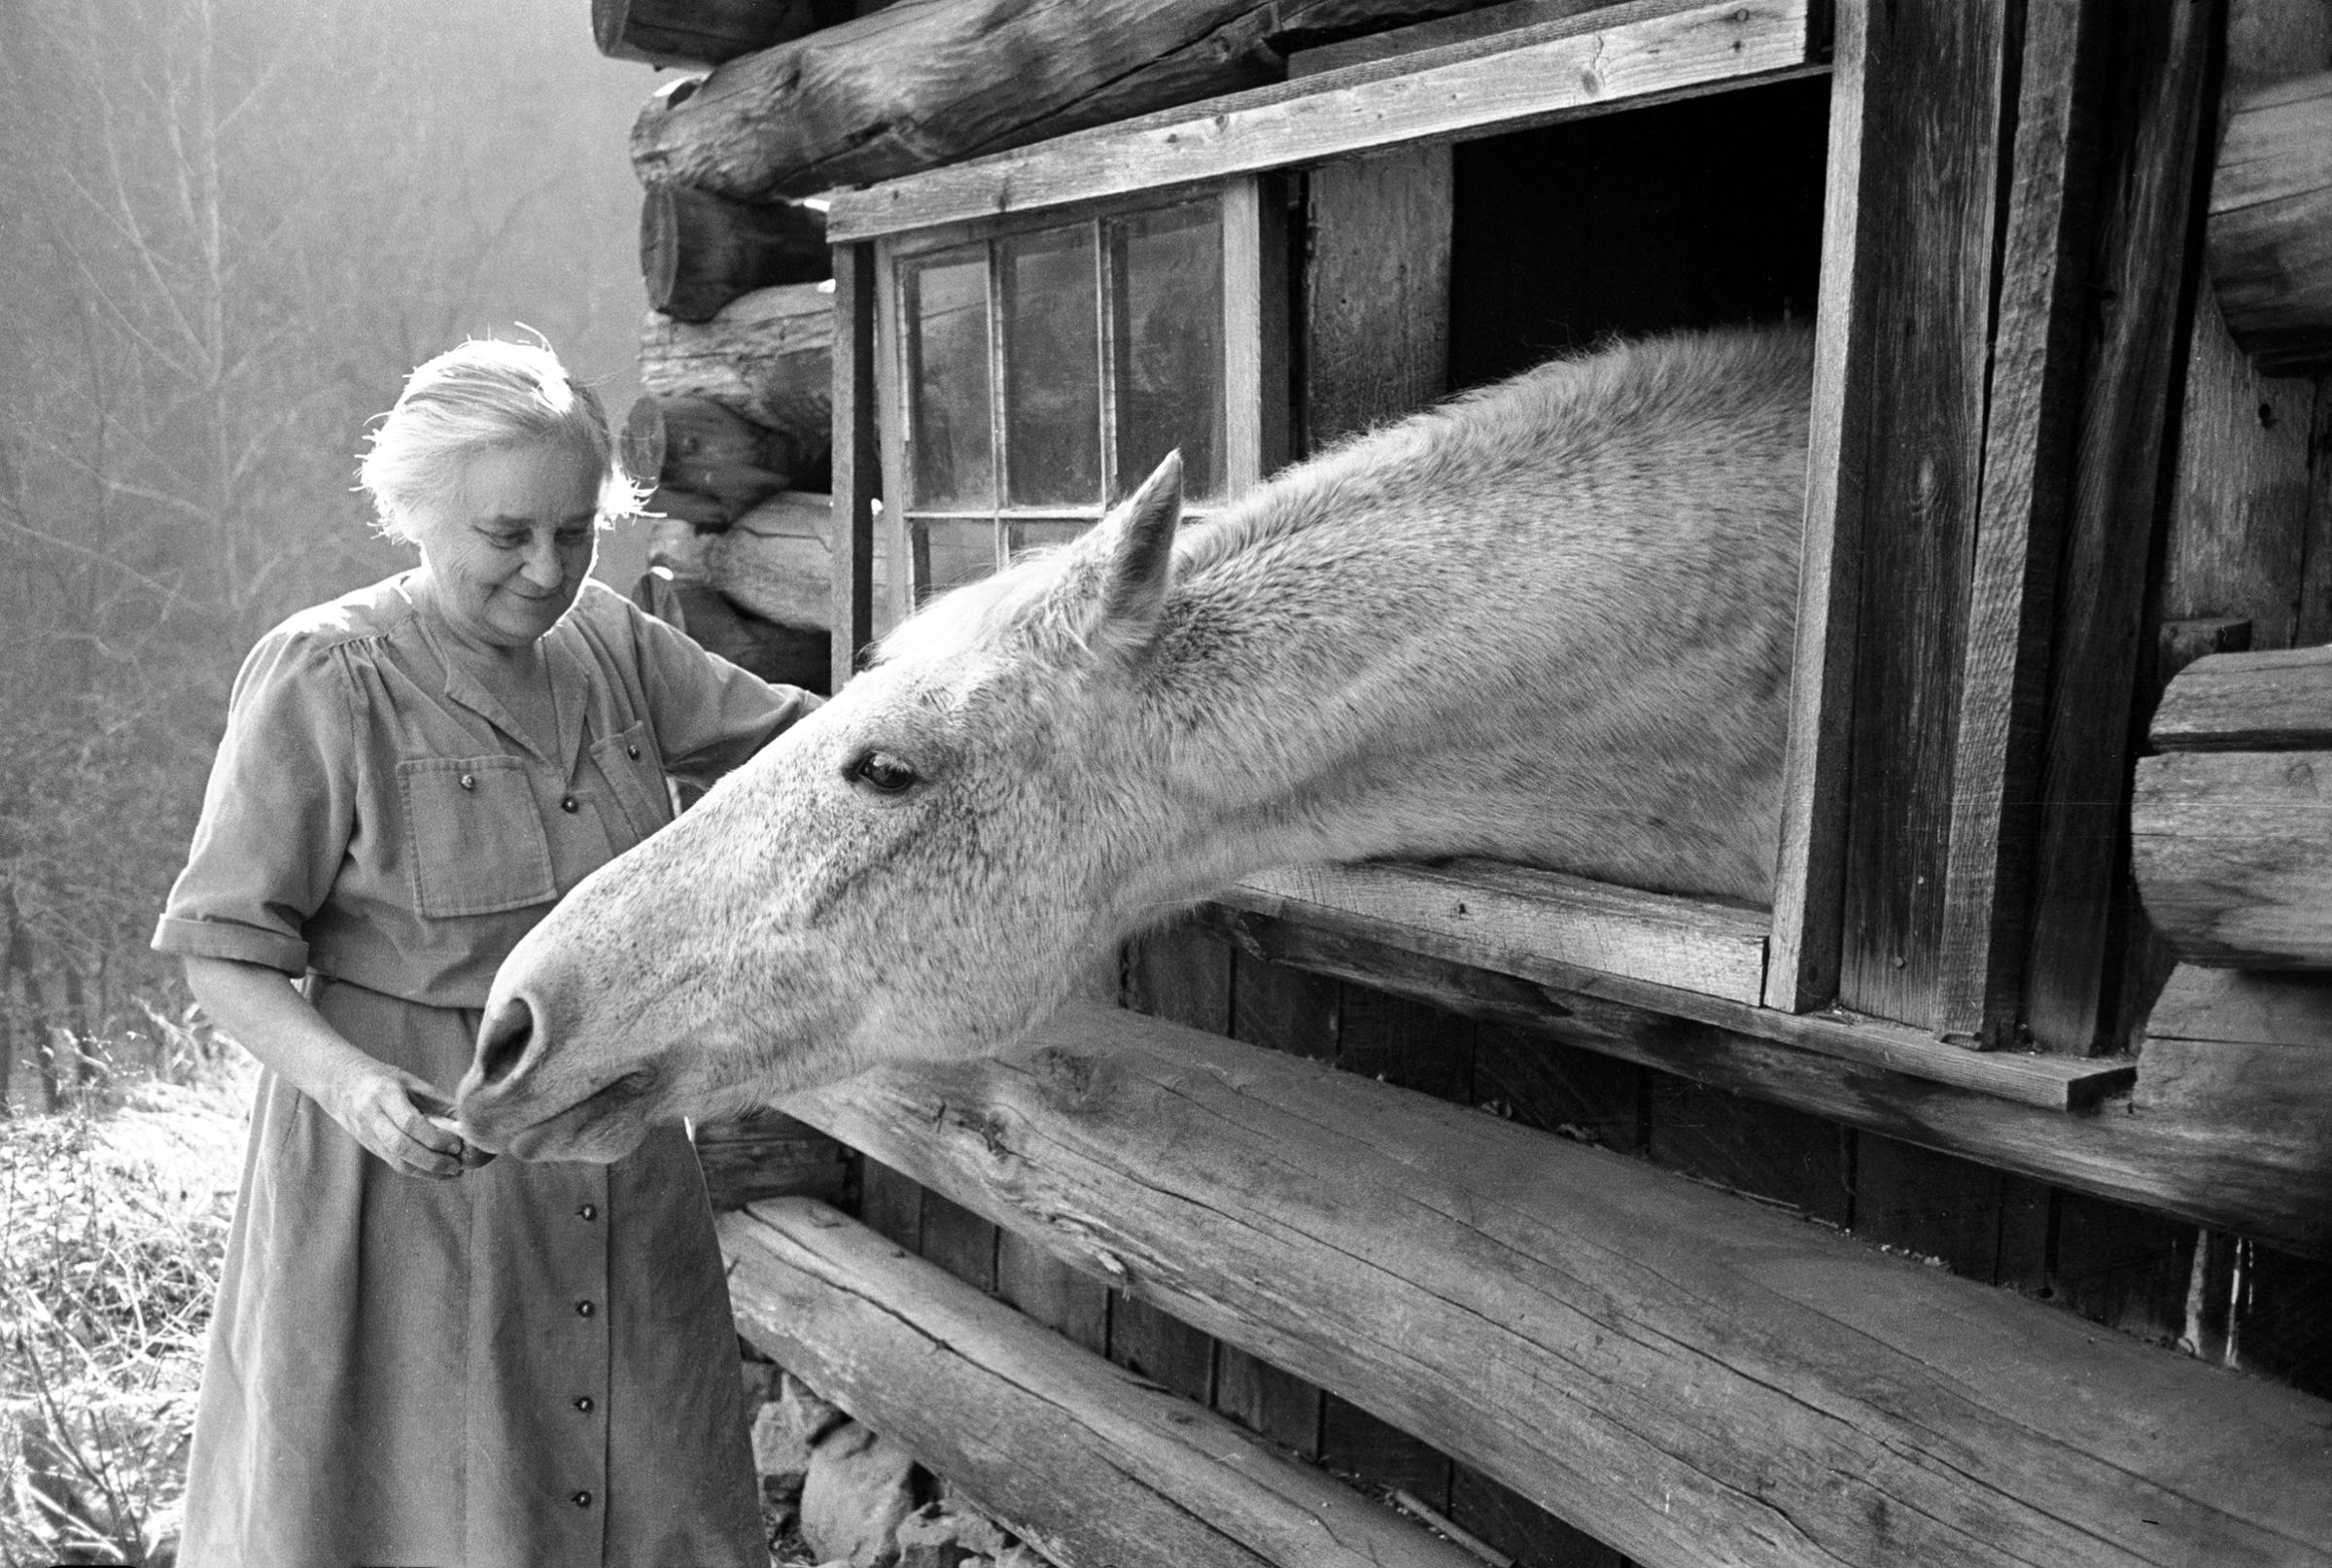 Mrs. Mary Breckenridge who runs Frontier Nursing Service, petting her horse. Leslie Country, Kentucky, 1949.